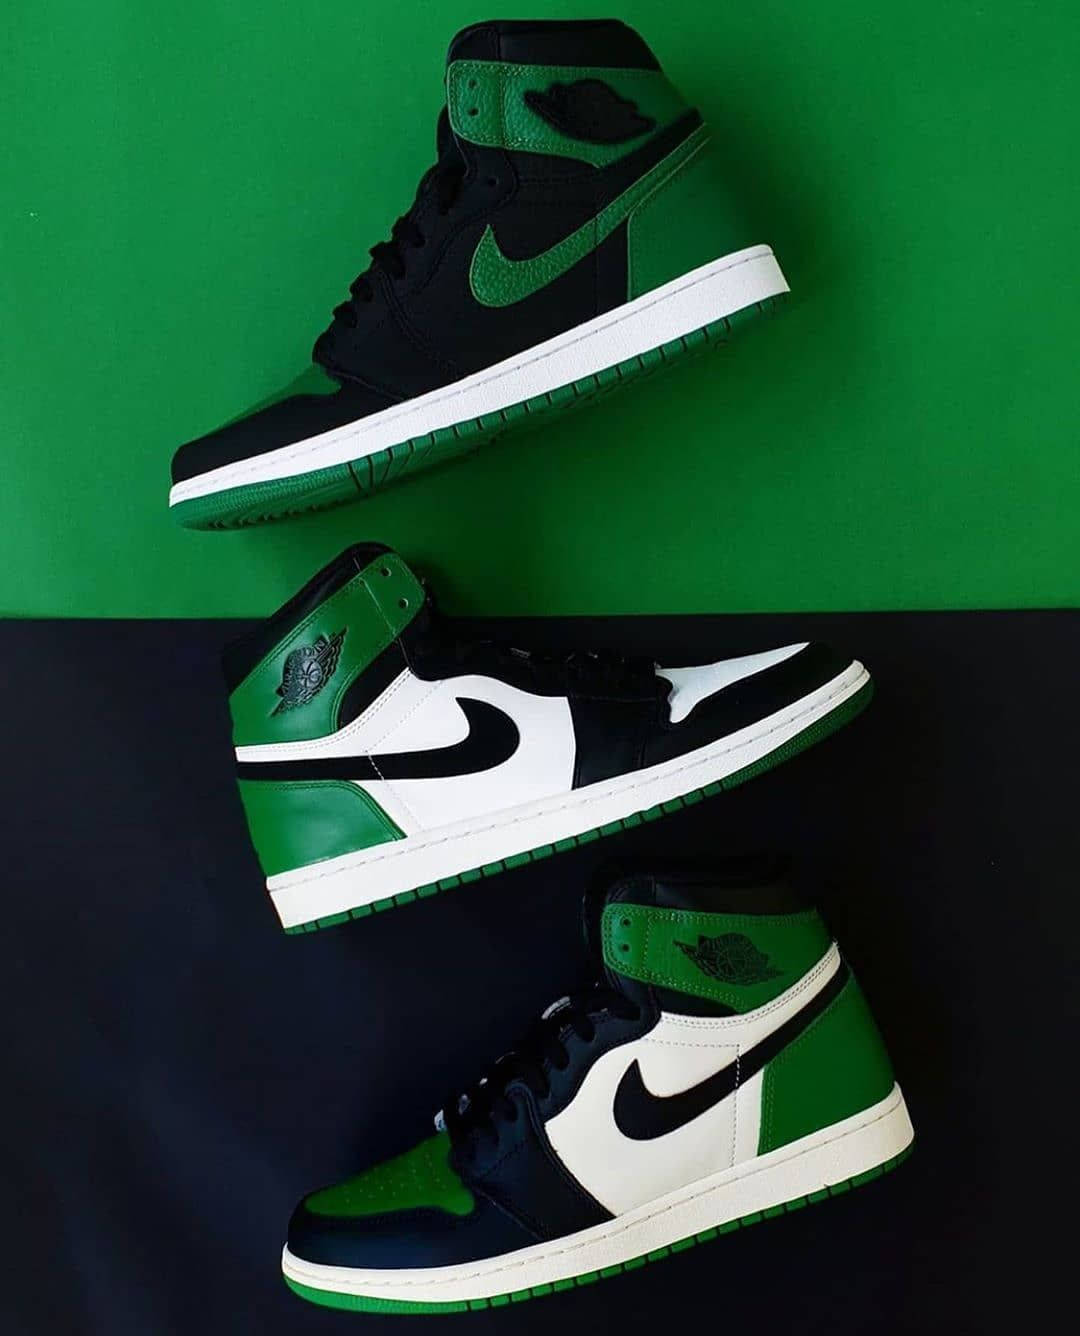 Two Pairs Of Air Jordan 1's Are Shown On A Green And Black Background Wallpaper